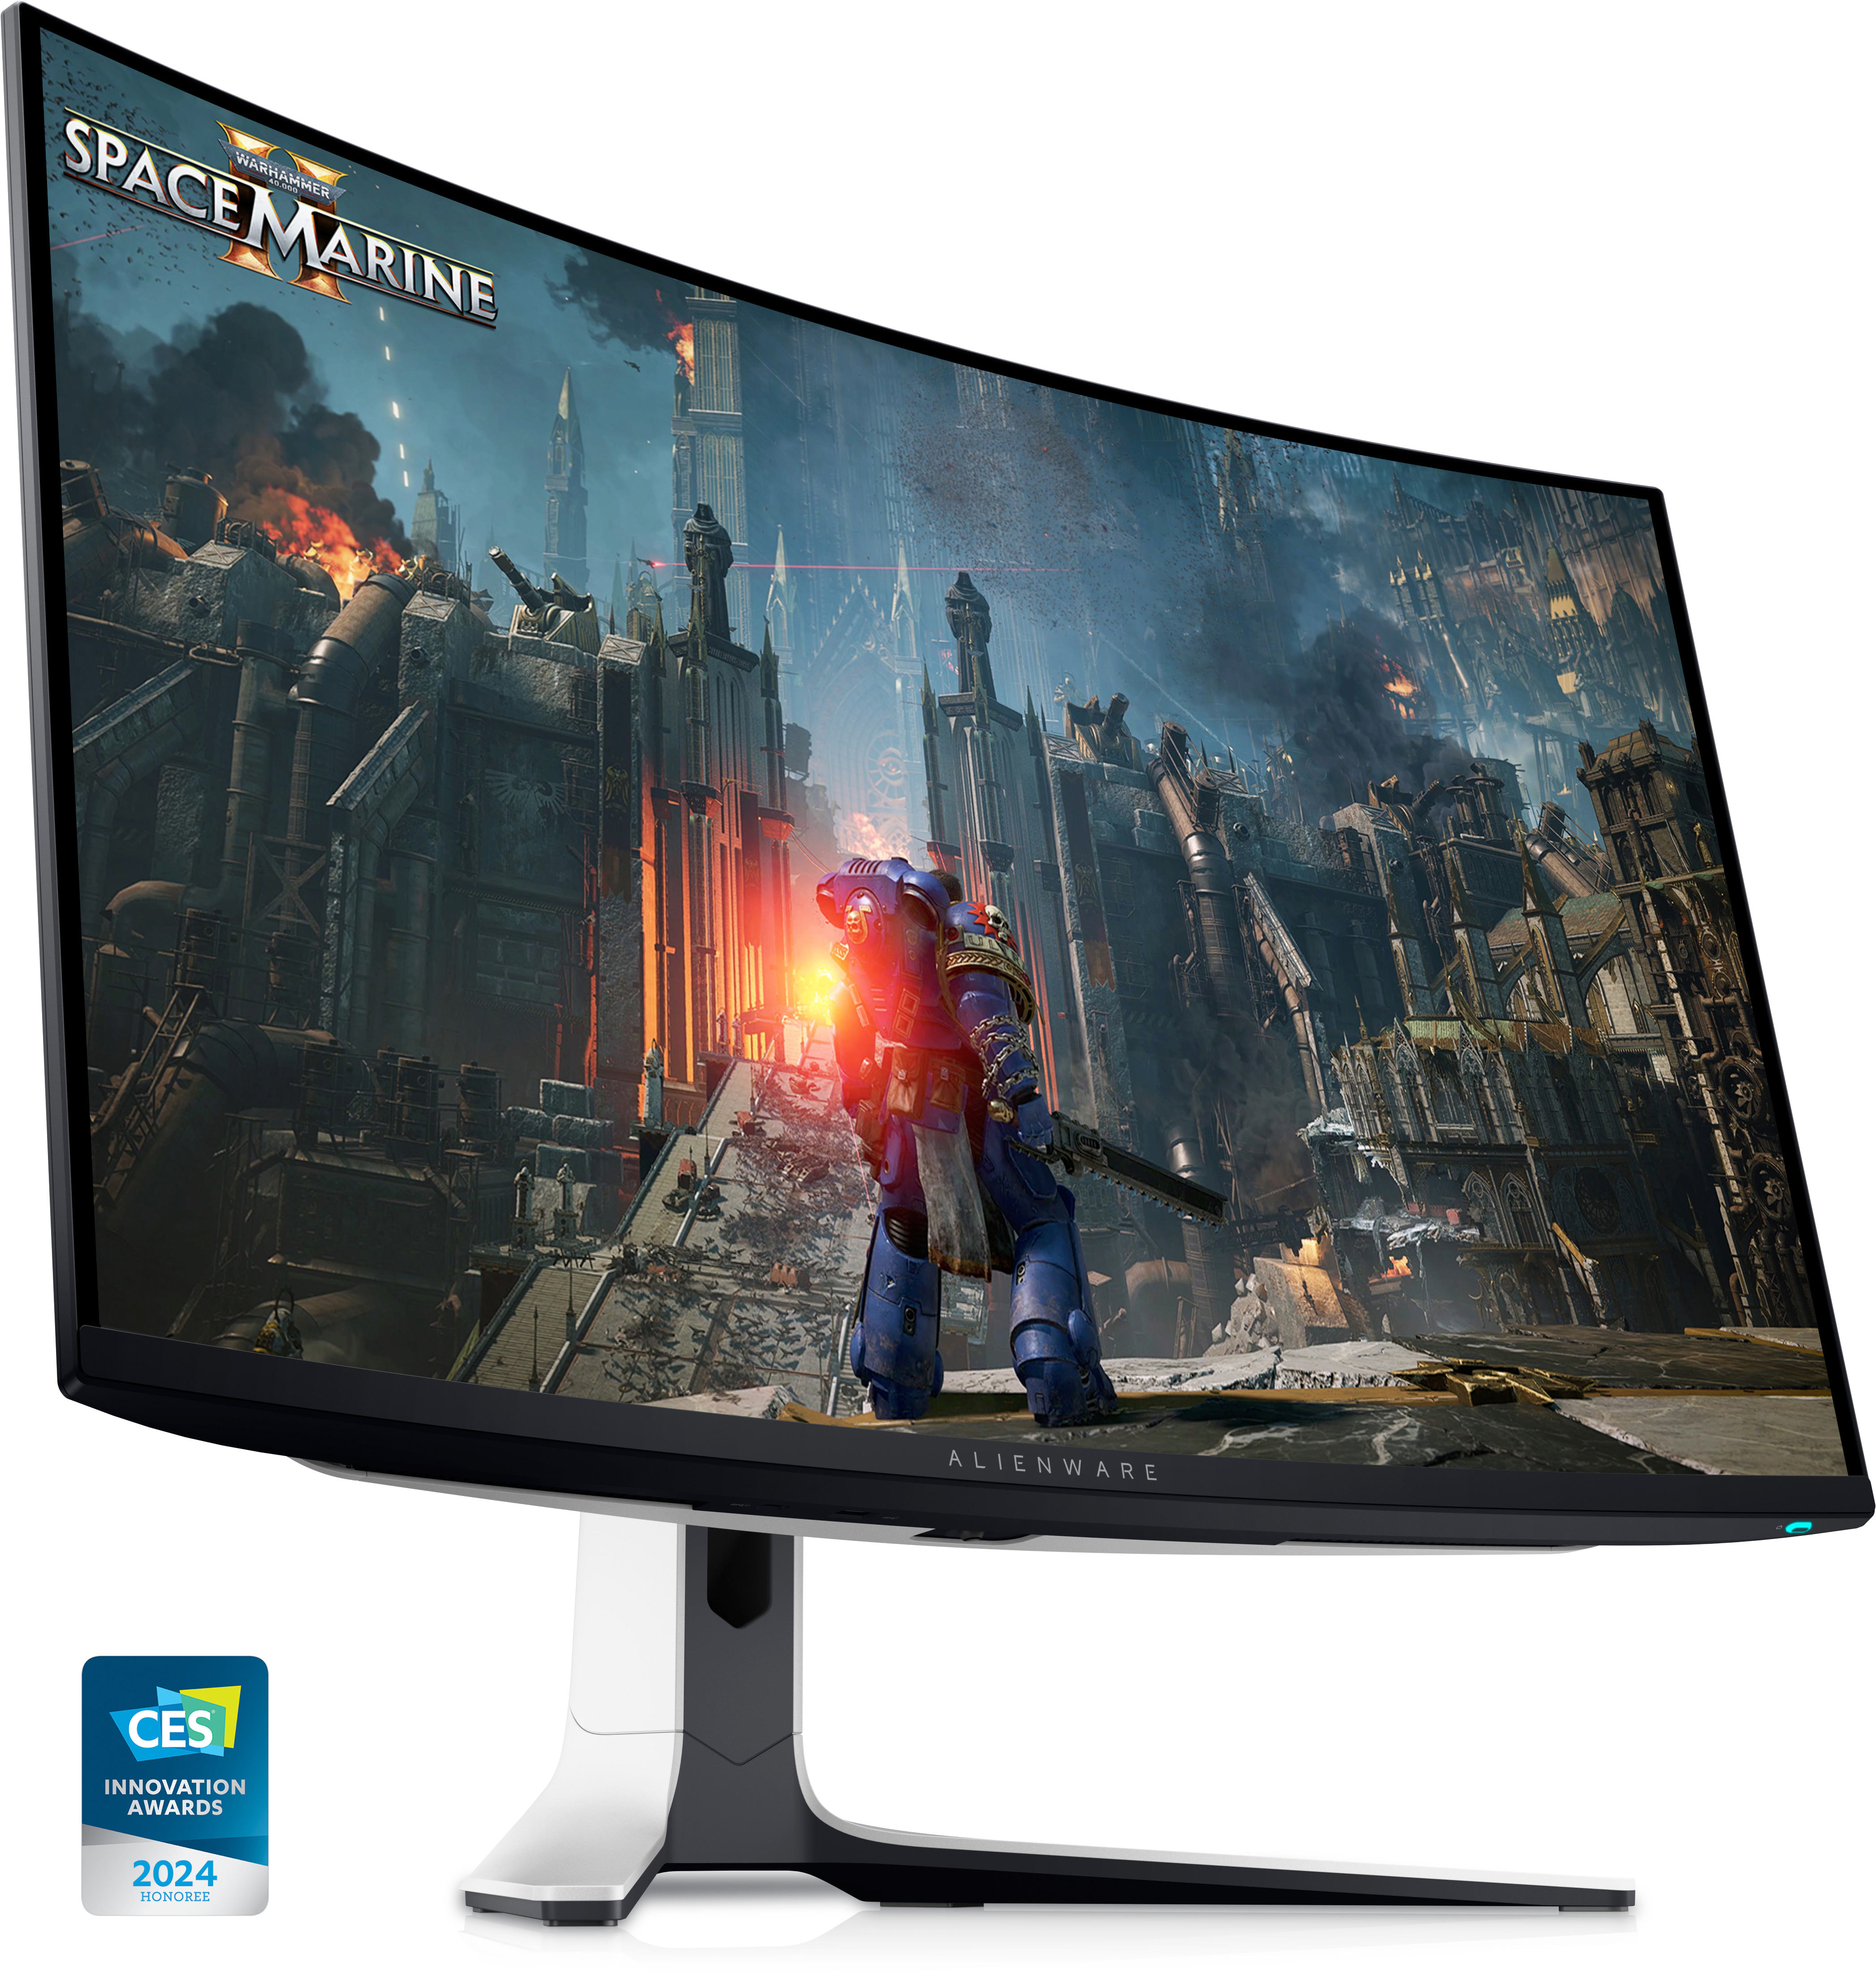 GAME HERO® 44 pouches UltraWide Full HD IPS 120Hz Gaming Monitor